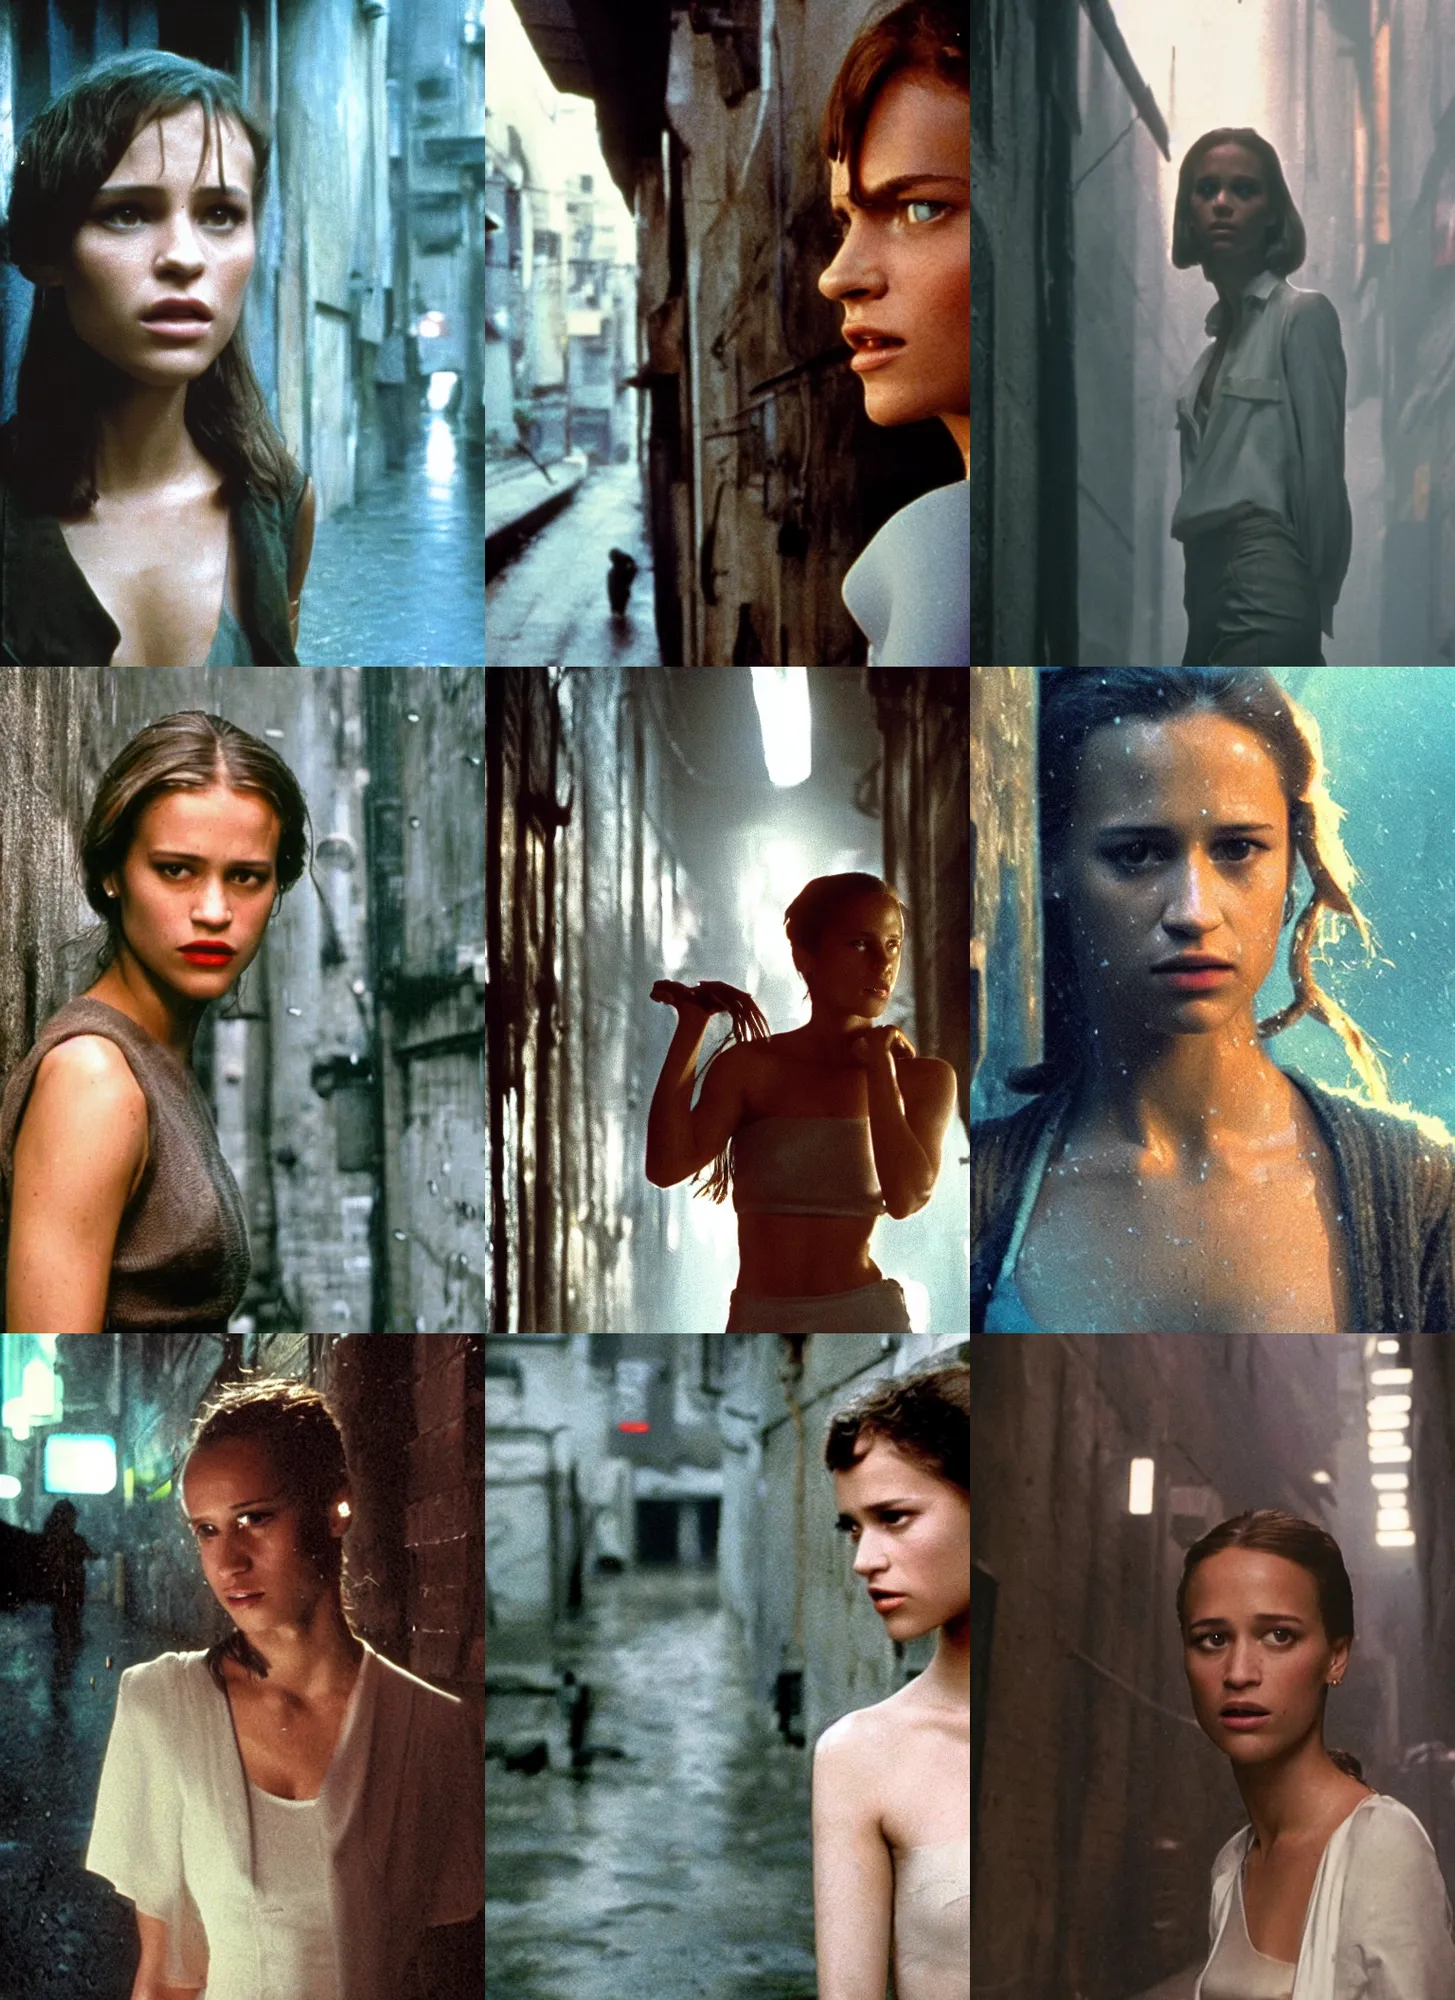 Prompt: A close-up, color outdoor film still of a Alicia Amanda Vikander in white is standing in the alleyway, dynamic lighting at heavy rain, from Blade Runner(1982).